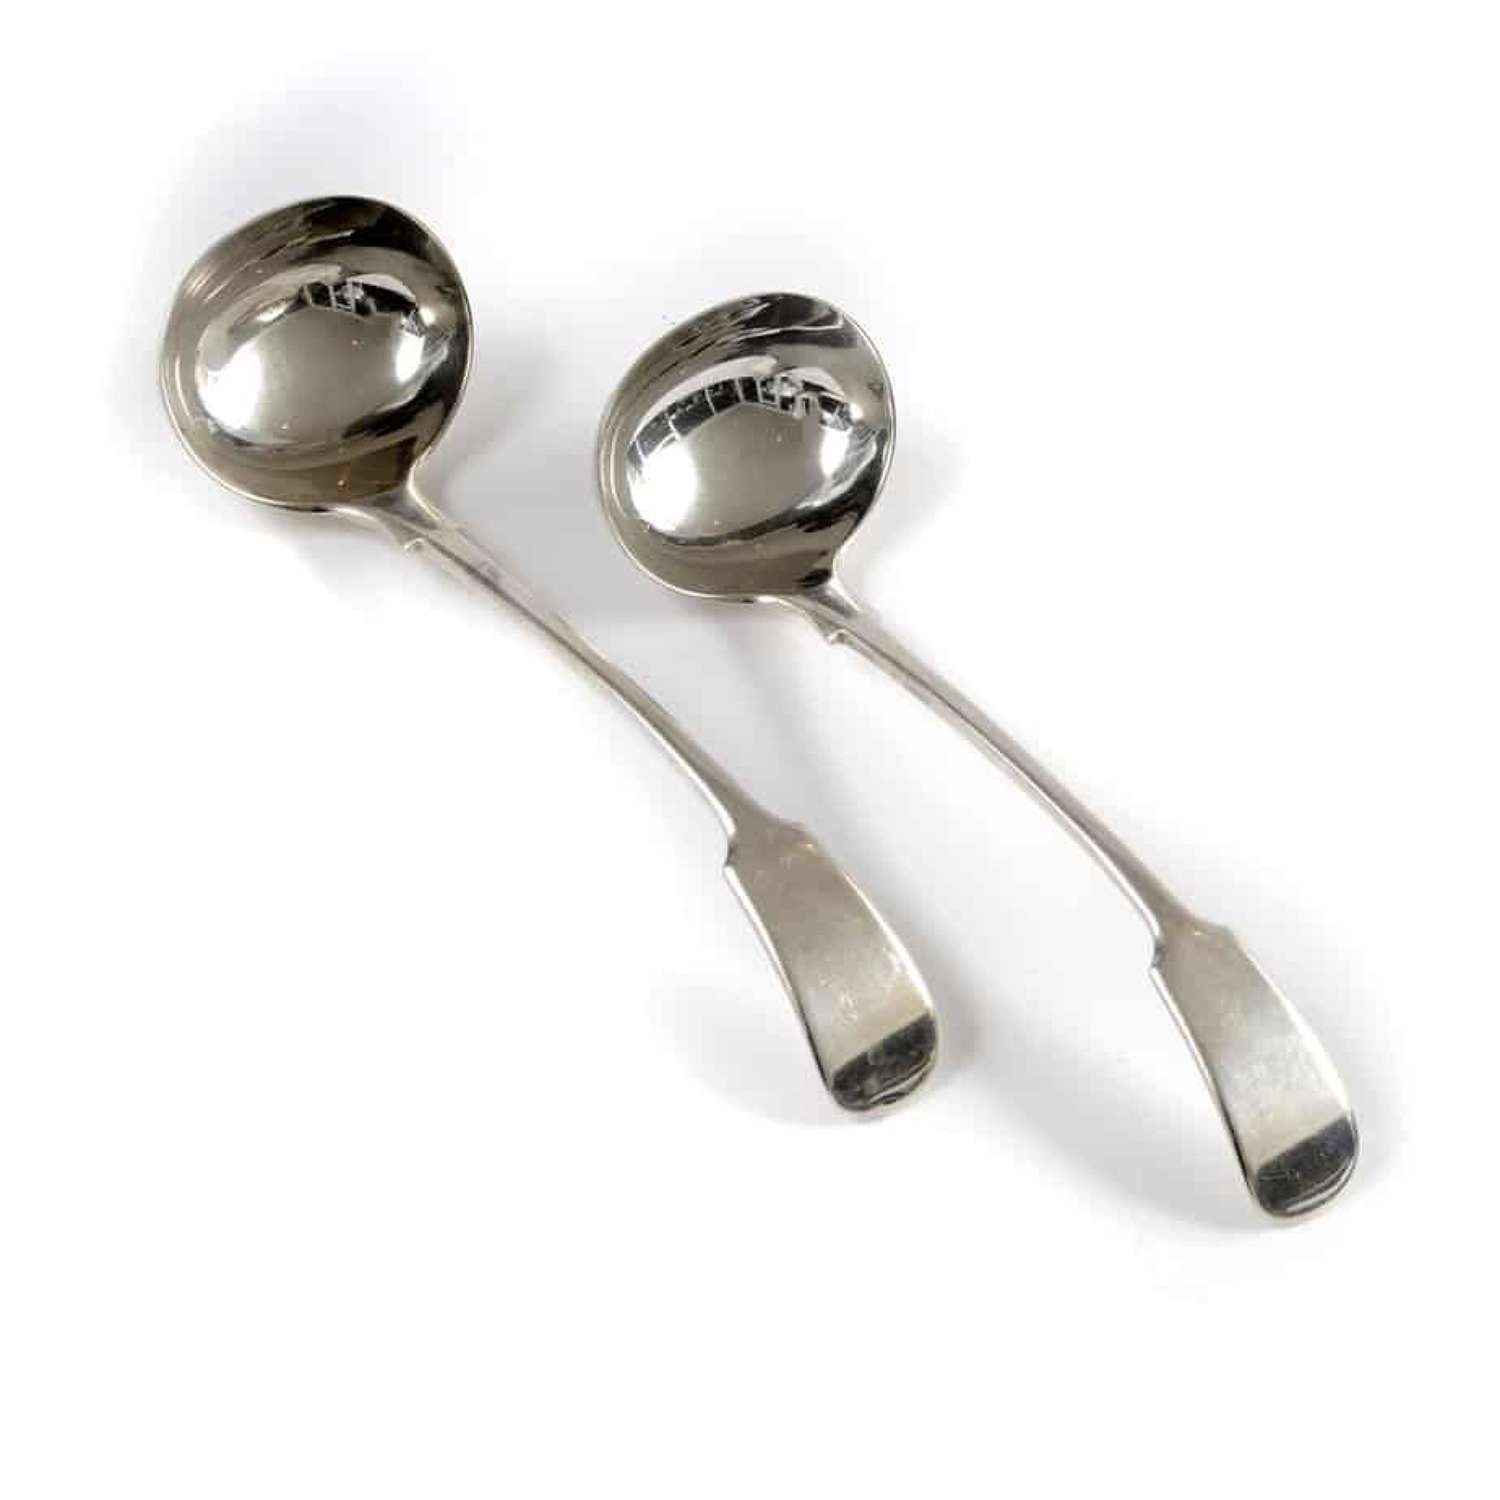 Pair of silver sauce ladles - by Robert William Jay